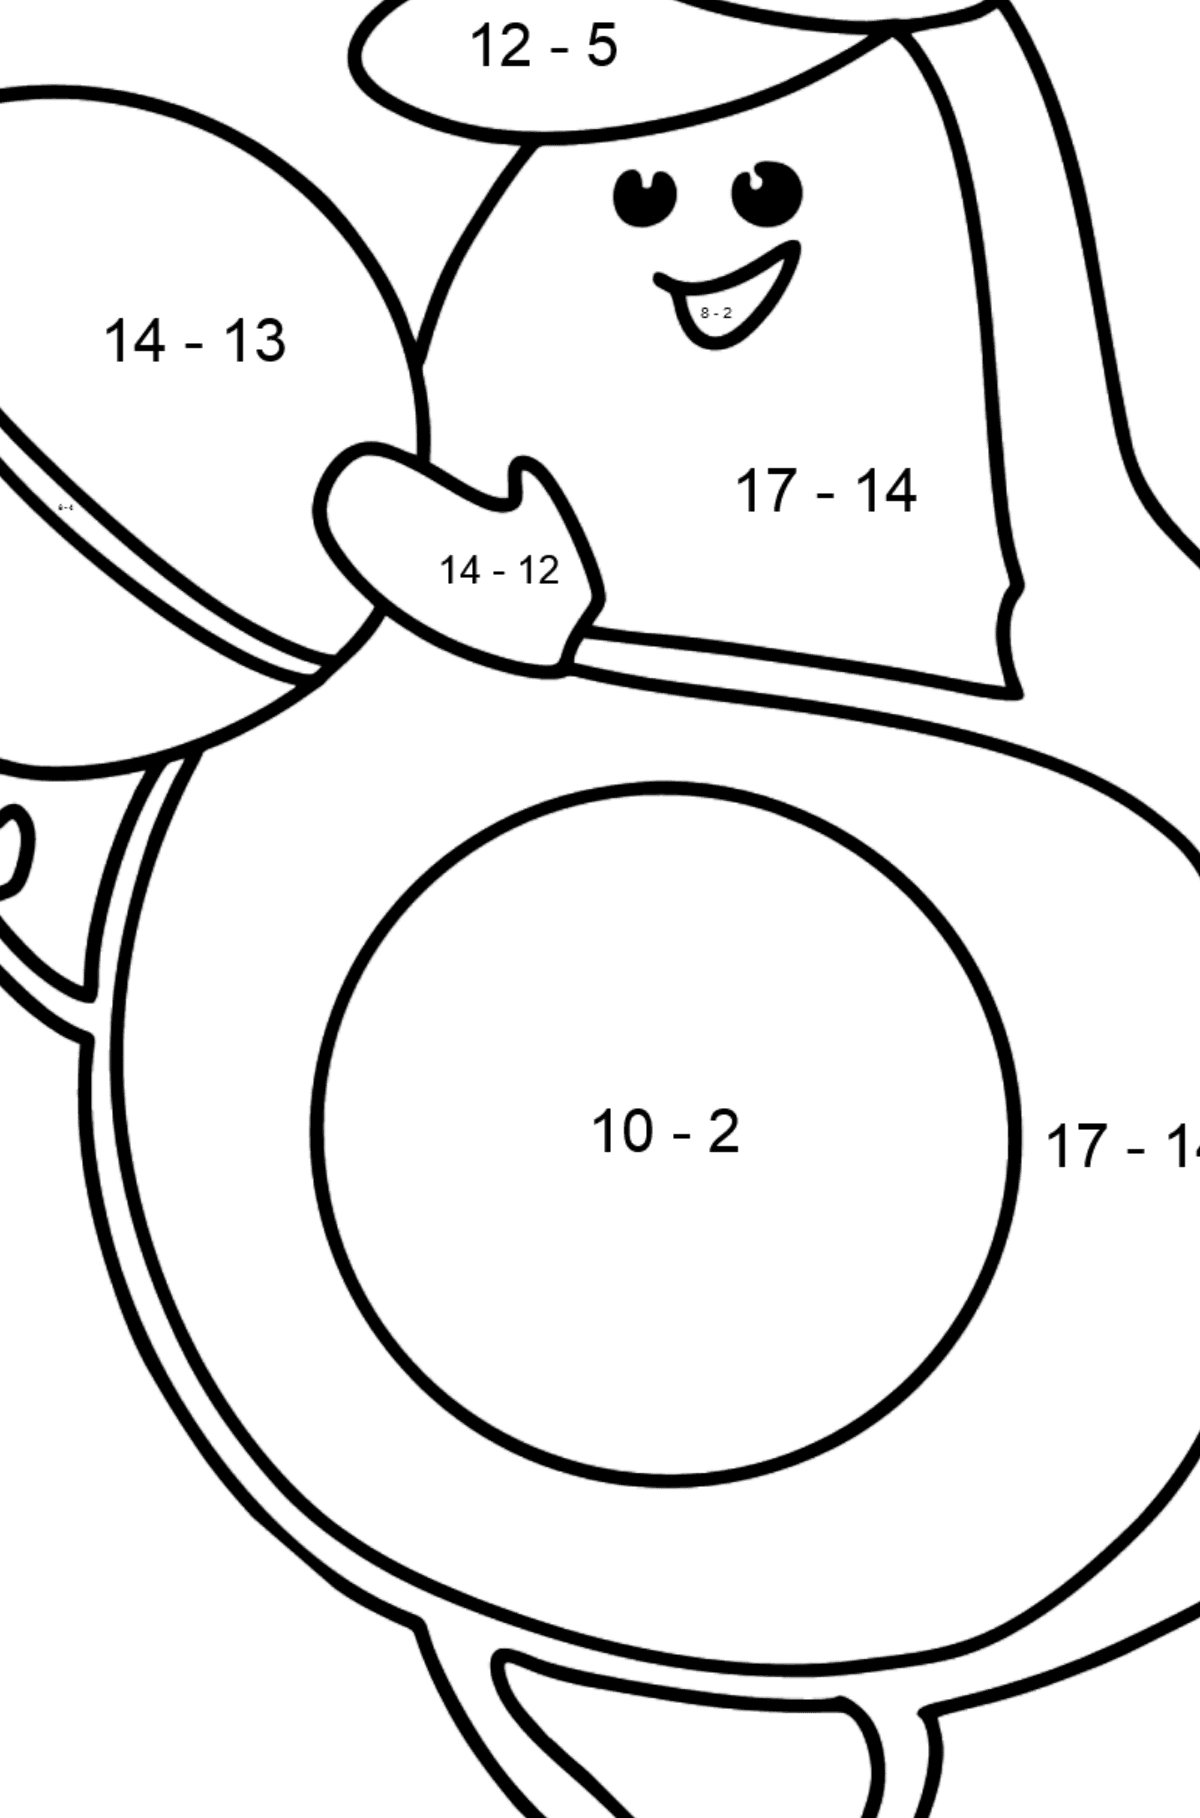 Avocado Plays Football coloring page - Math Coloring - Subtraction for Kids